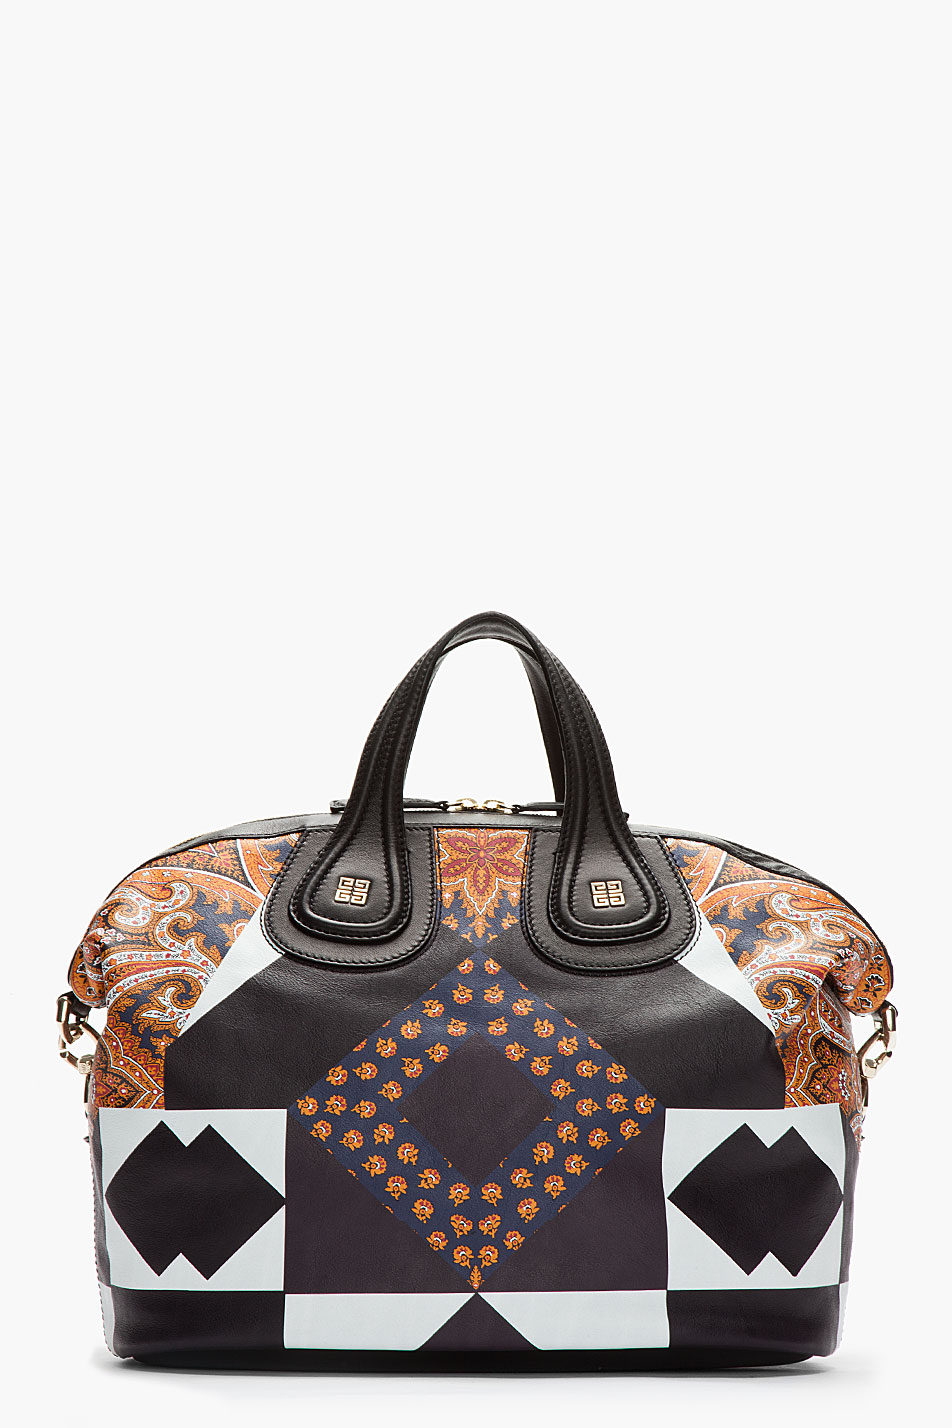 Givenchy Paisley Leather Bag in Black - Lyst